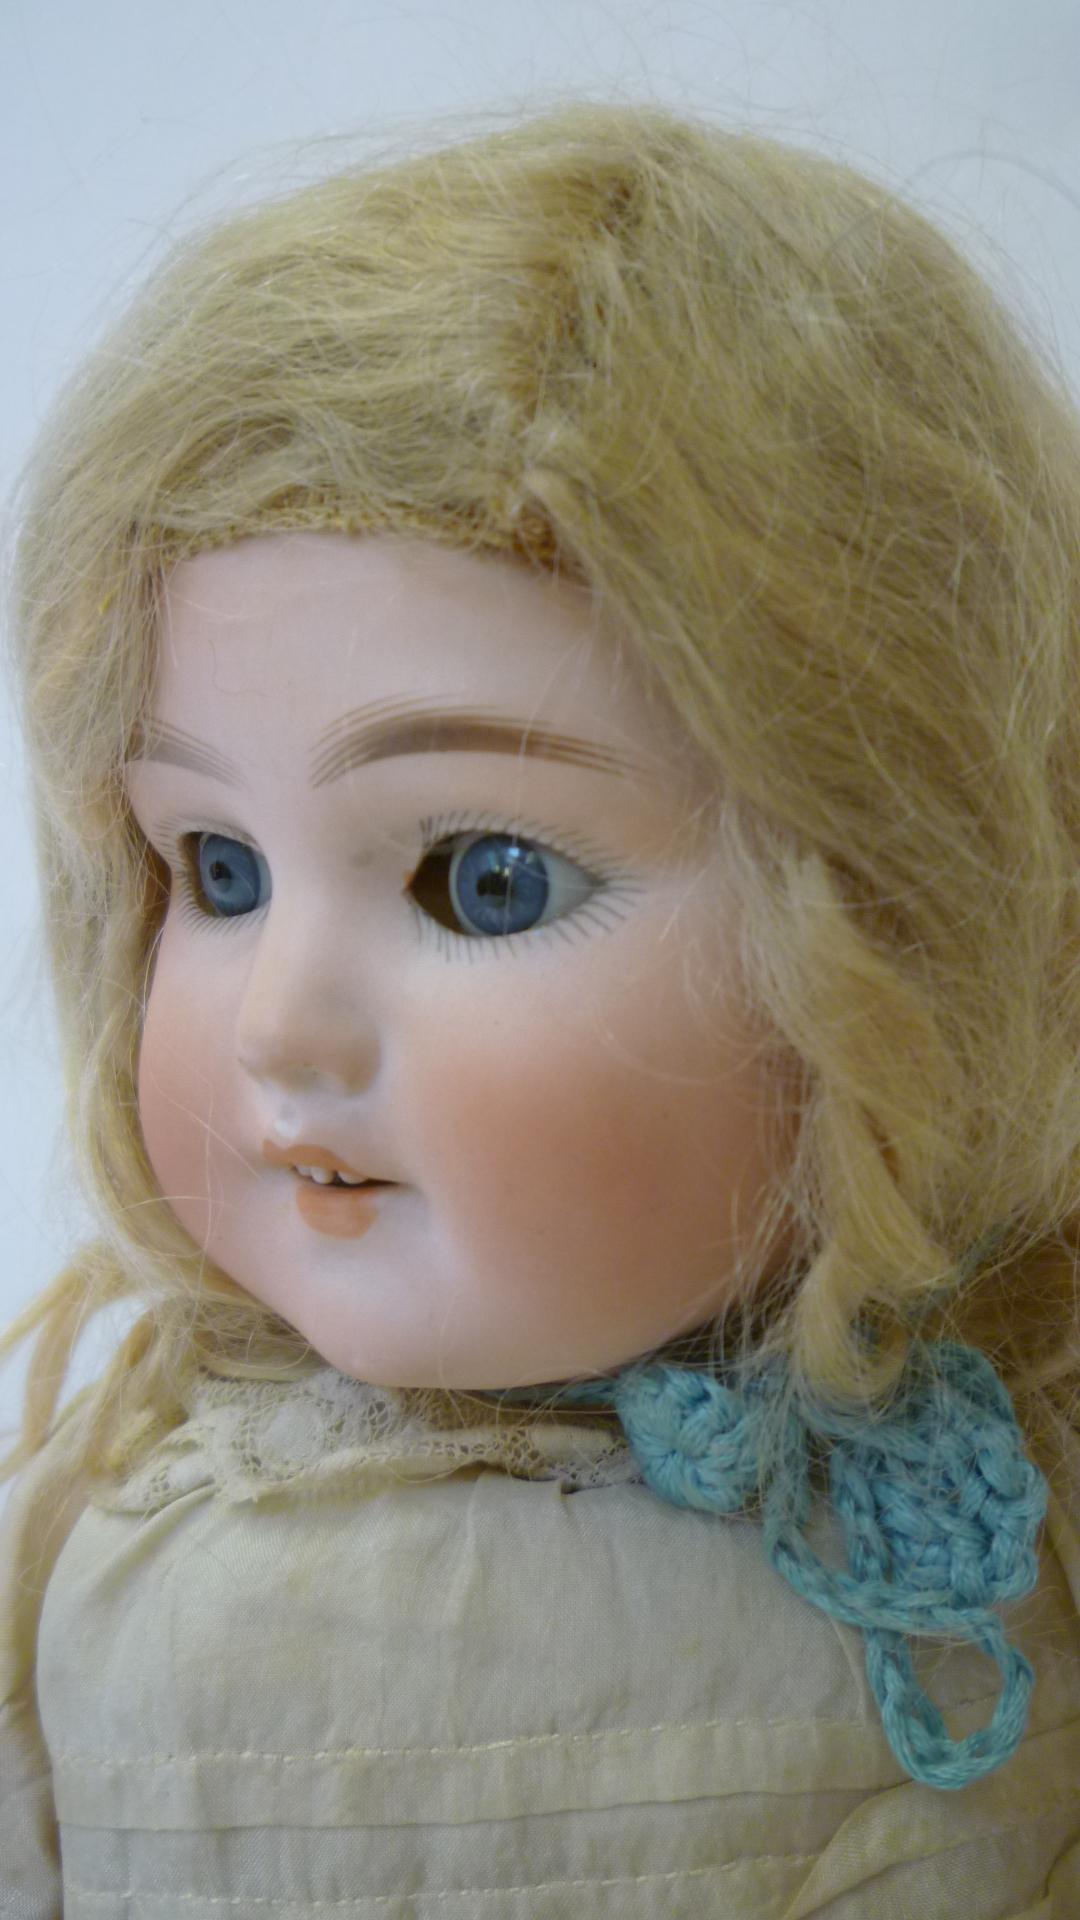 A Schoenau & Hoffmeister bisque head girl doll with blue glass sleeping eyes, open mouth and - Image 2 of 2